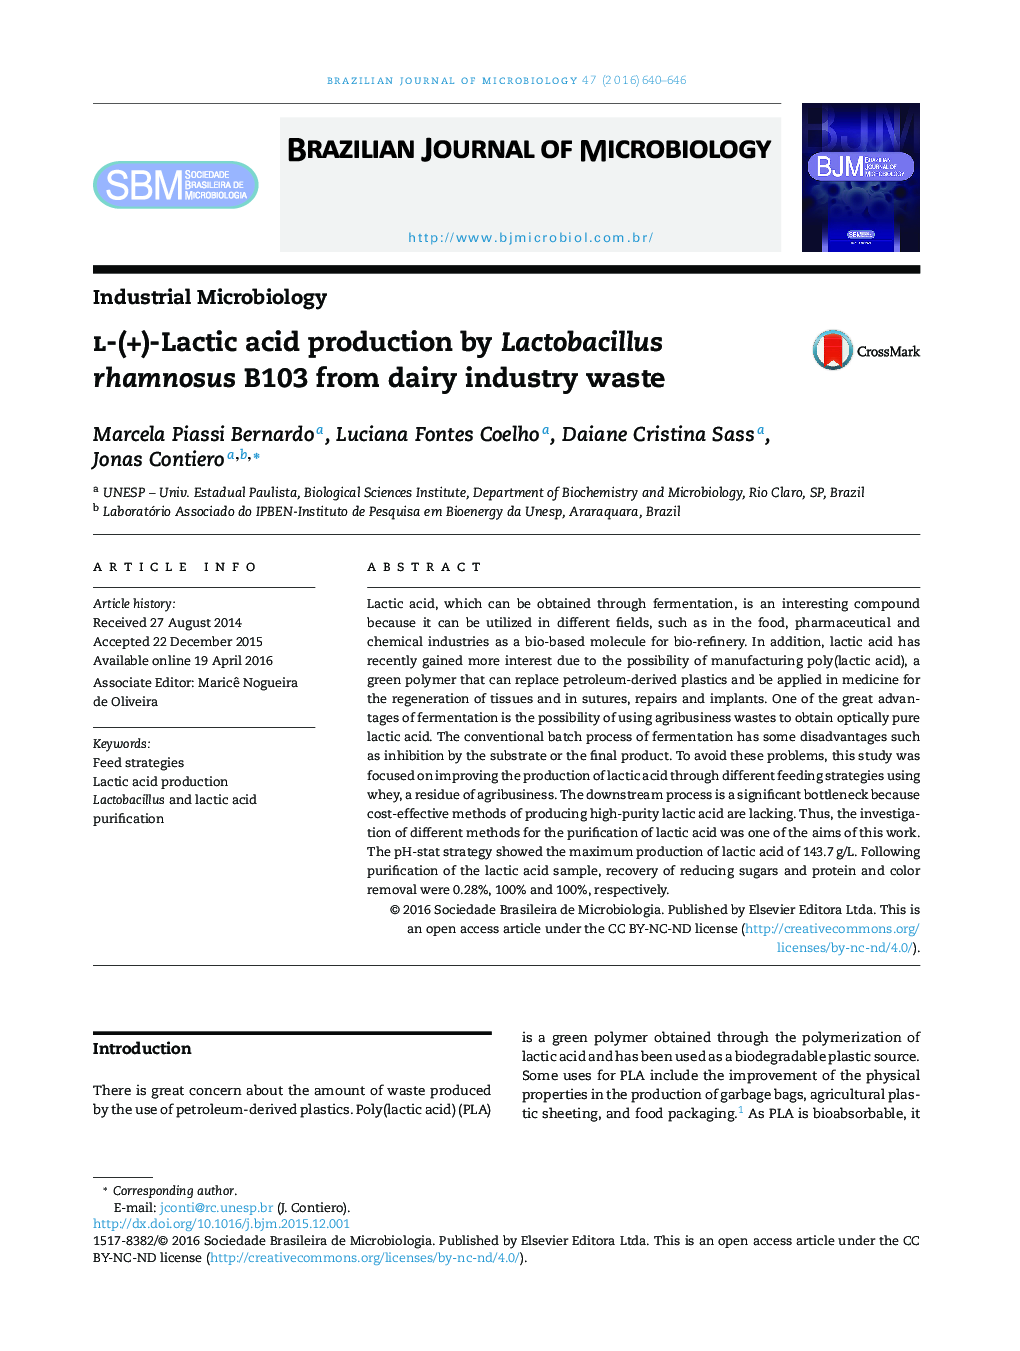 l-(+)-Lactic acid production by Lactobacillus rhamnosus B103 from dairy industry waste